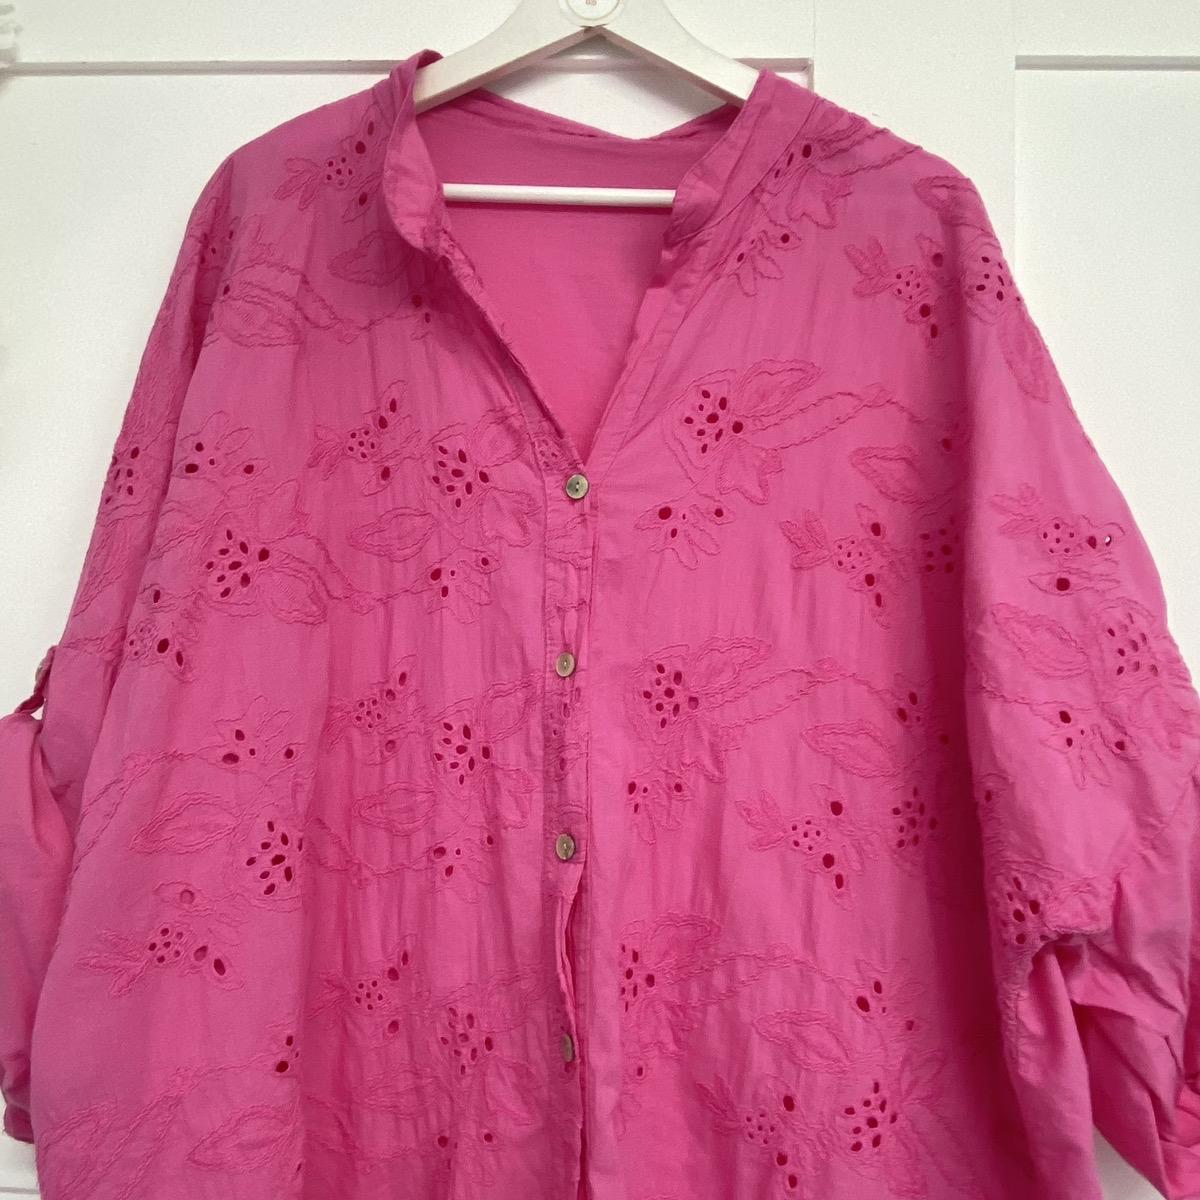 Ailsa Broderie Anglaise shirt. One size 14-26